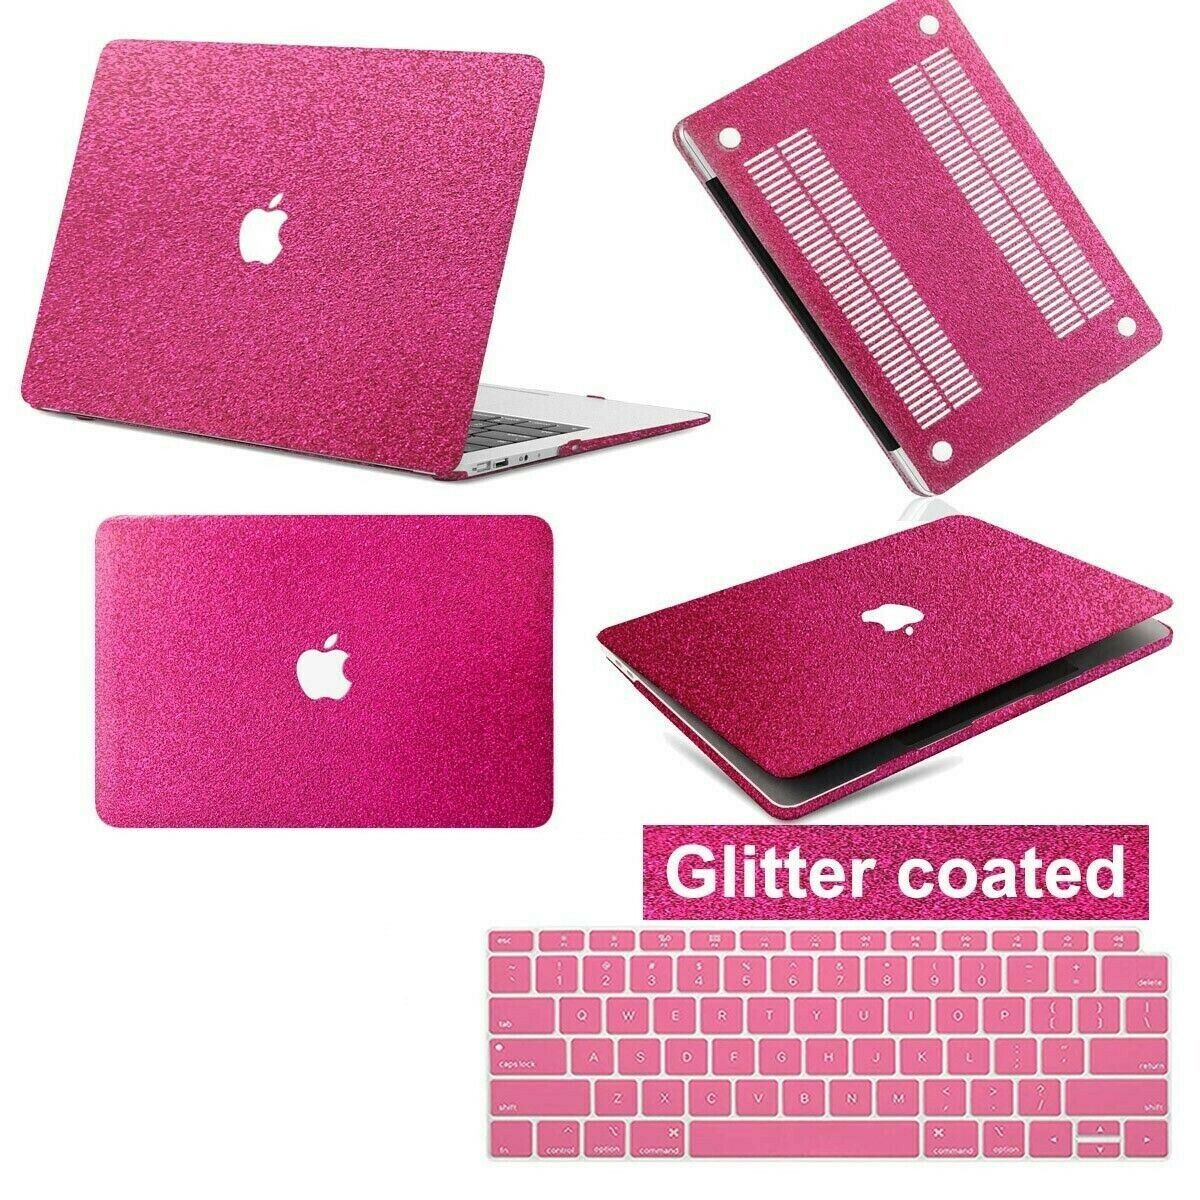 Shinny Glitter Rainbow Hard Case KB Cover For New Macbook Pro Air 11 13 14 15 16